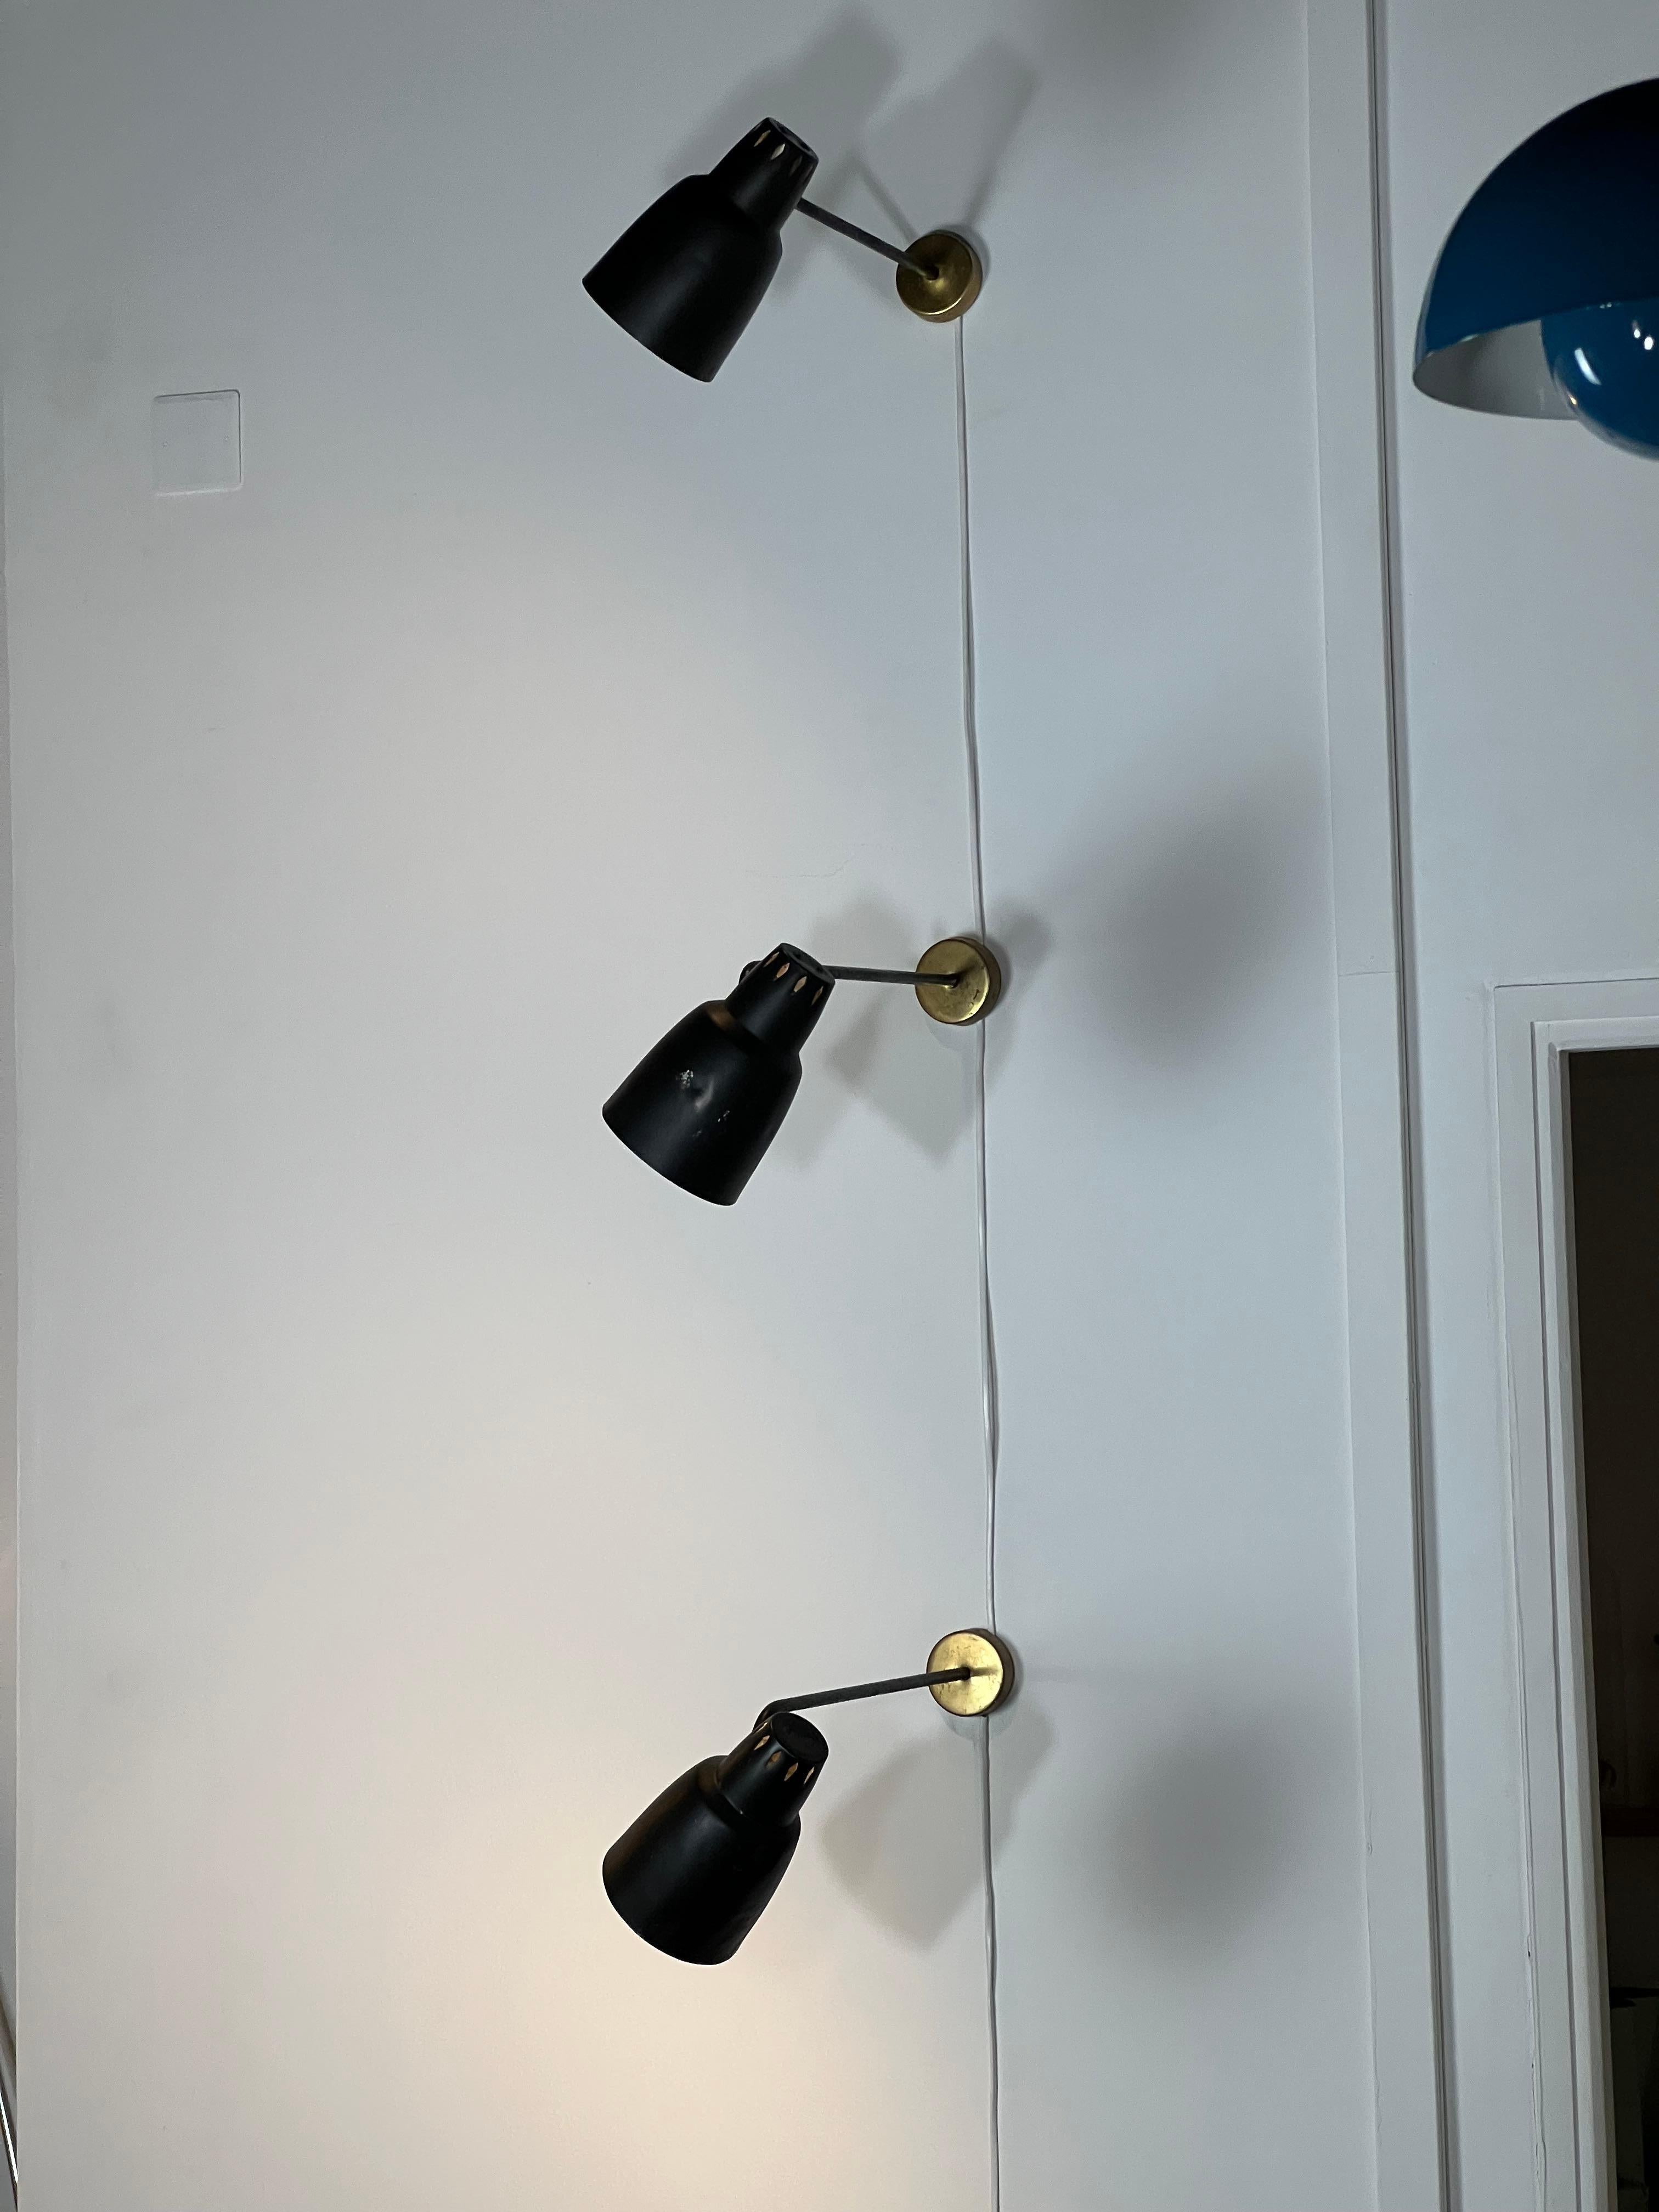 Wall lamp from the 1950s, edited by the French company Parscot.
Its structure is composed of a golden aluminium plate allowing its fixing to the wall. The fixing is extended by a black metal bent tubular arm.  The diffuser is directly connected to